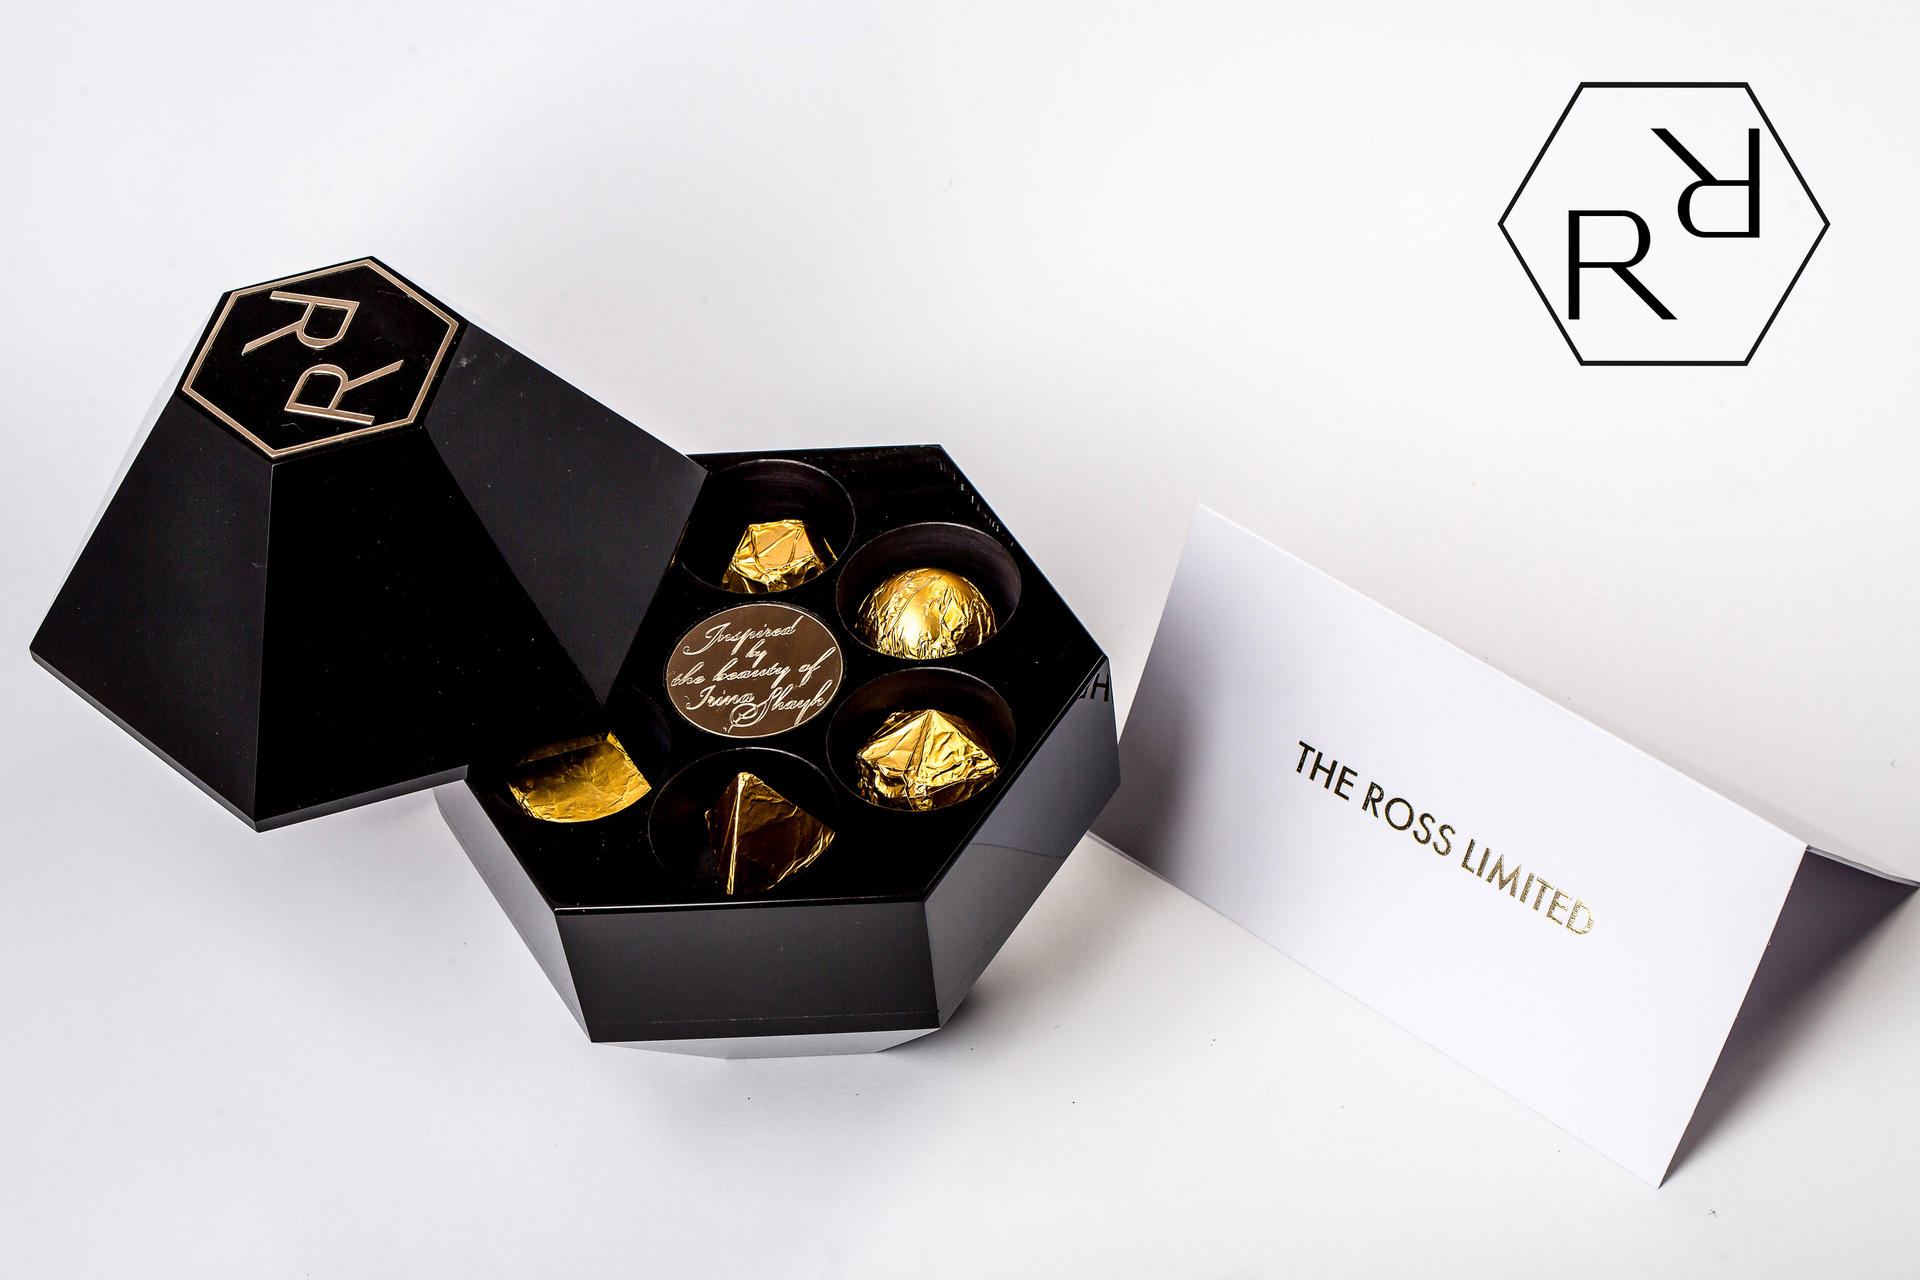 The Ross Ltd. creates most expensive chocolate in the world, 2016-01-19